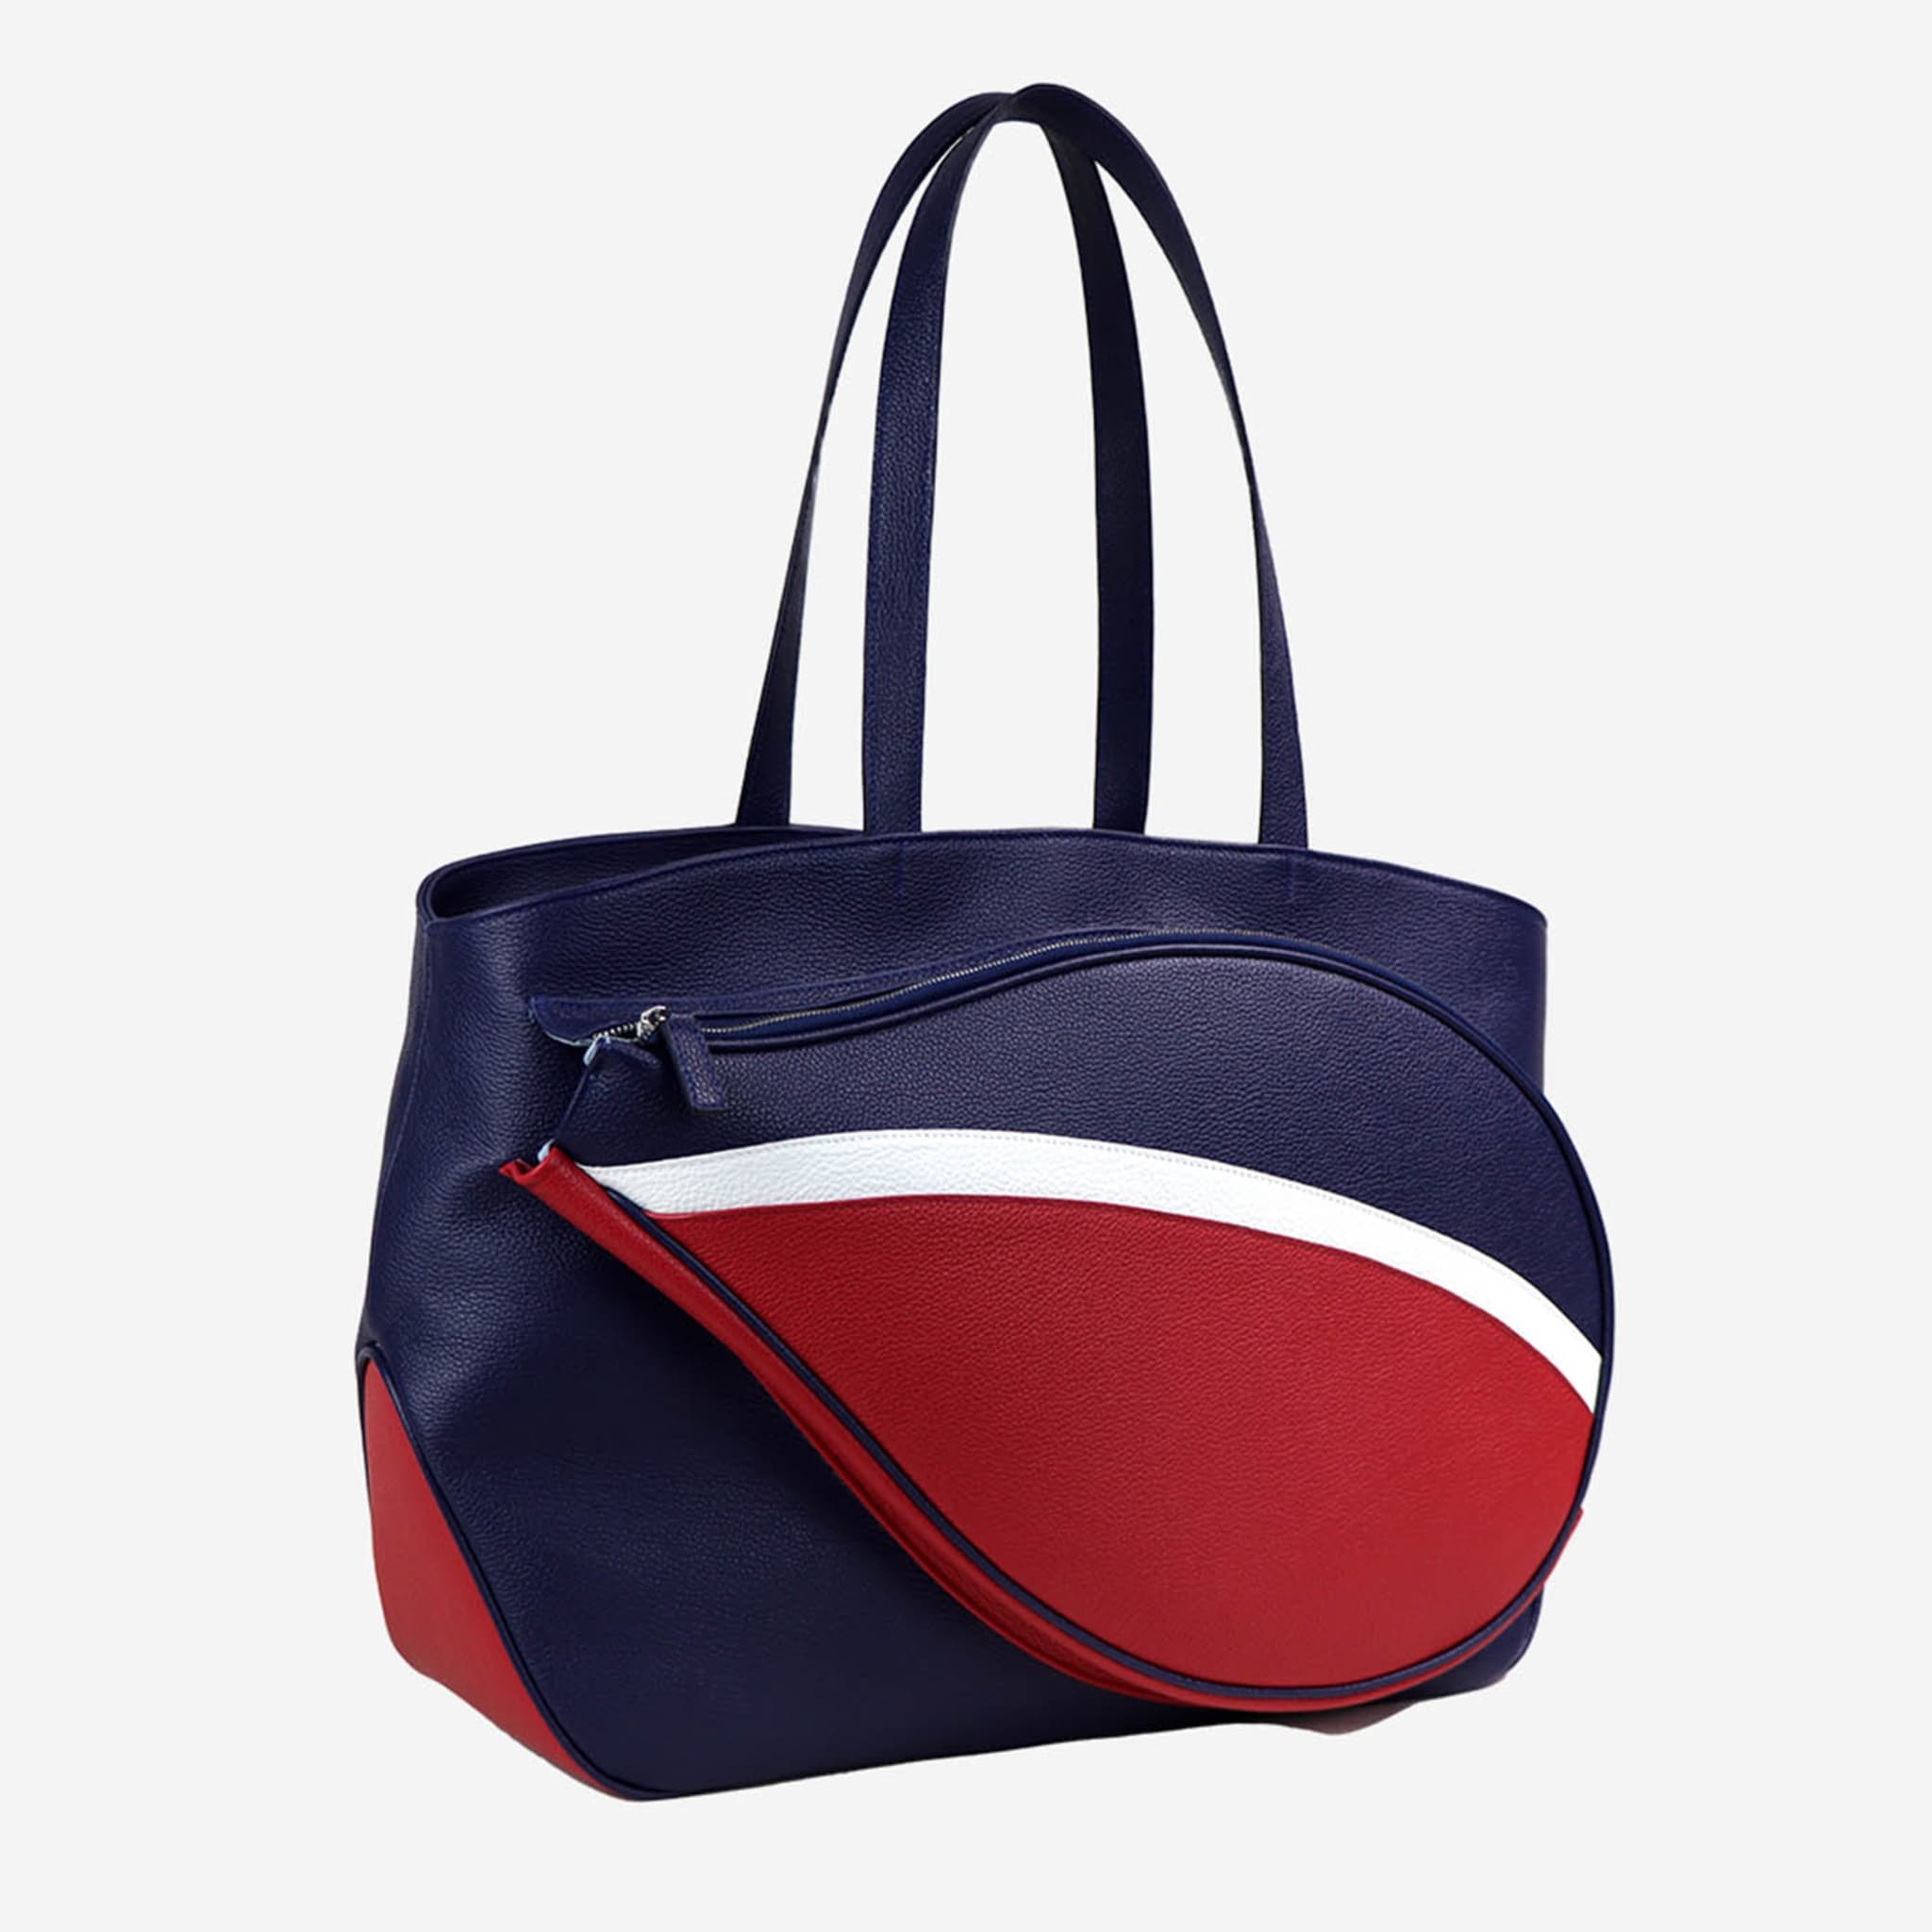 Sport Blue & Red Bag with Tennis-Racket-Shaped Pocket - Alternative view 4